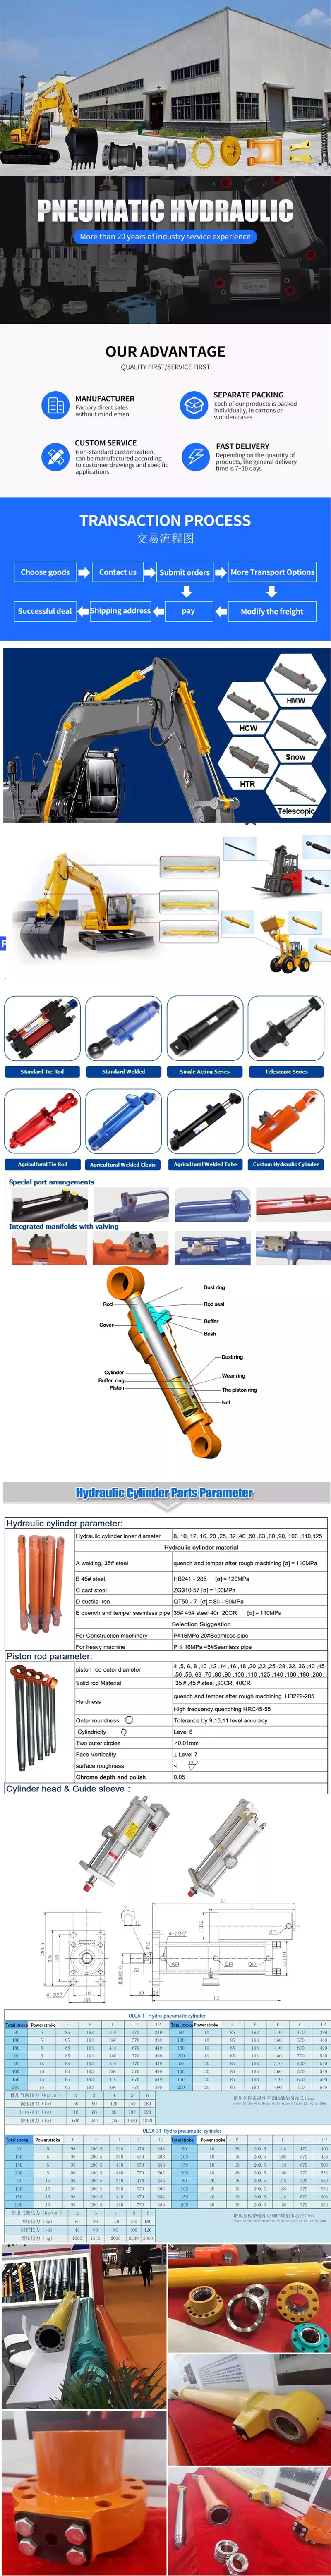 China high quality Straight Trip Regulated Type Tianjian by Plywood Case Piston Hydraulic Cylinder   vacuum pump booster	